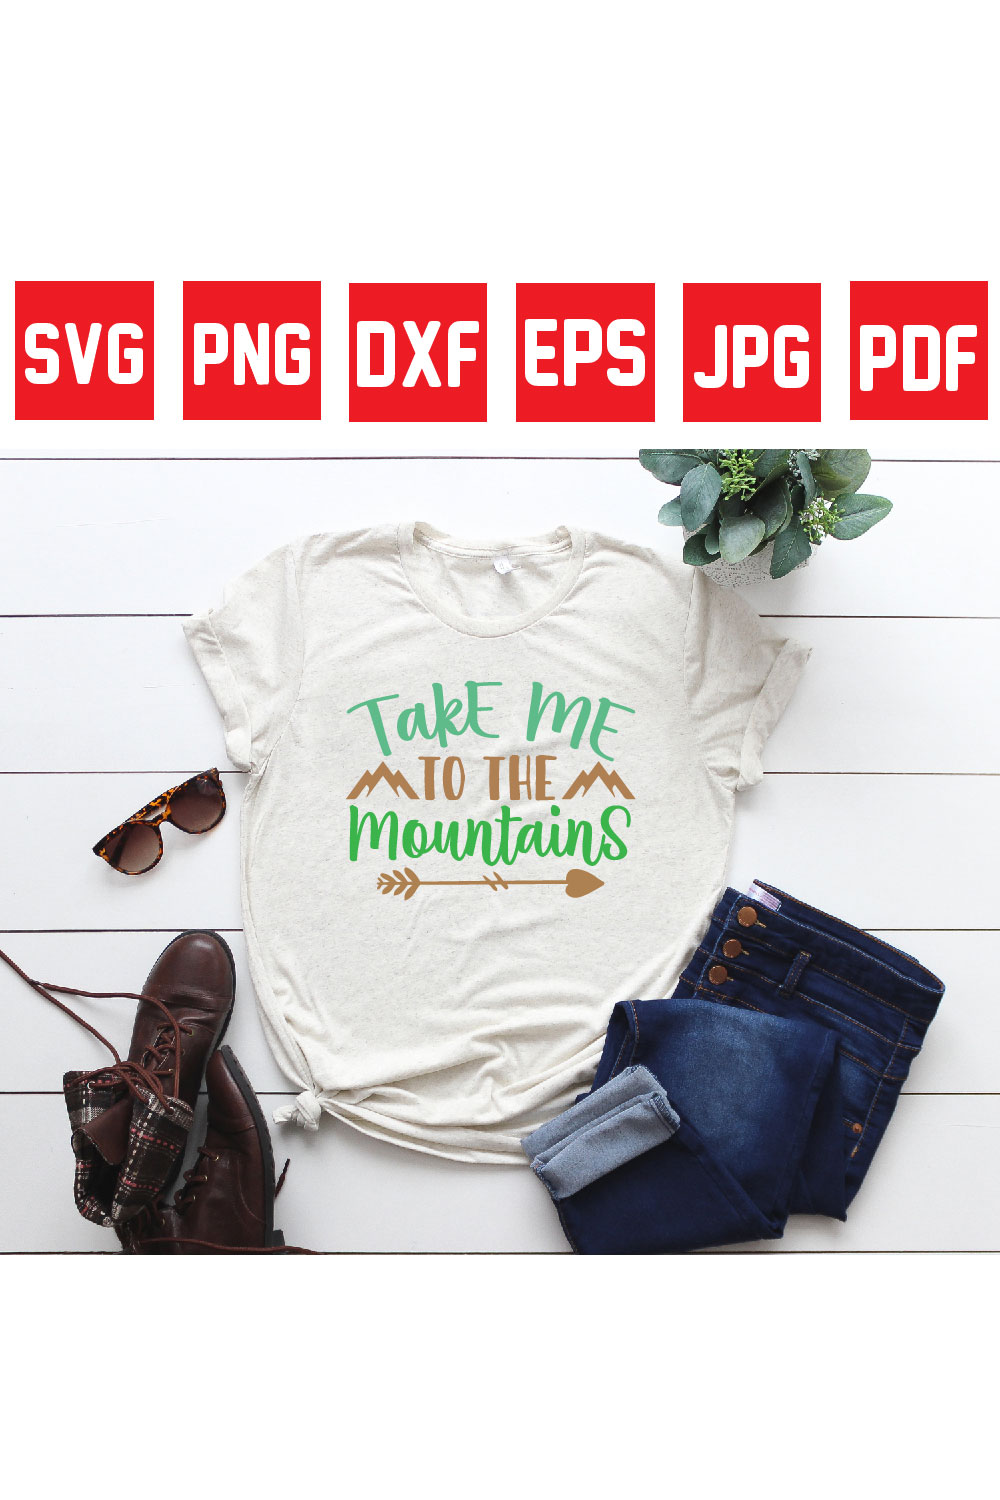 take me to the mountains pinterest preview image.